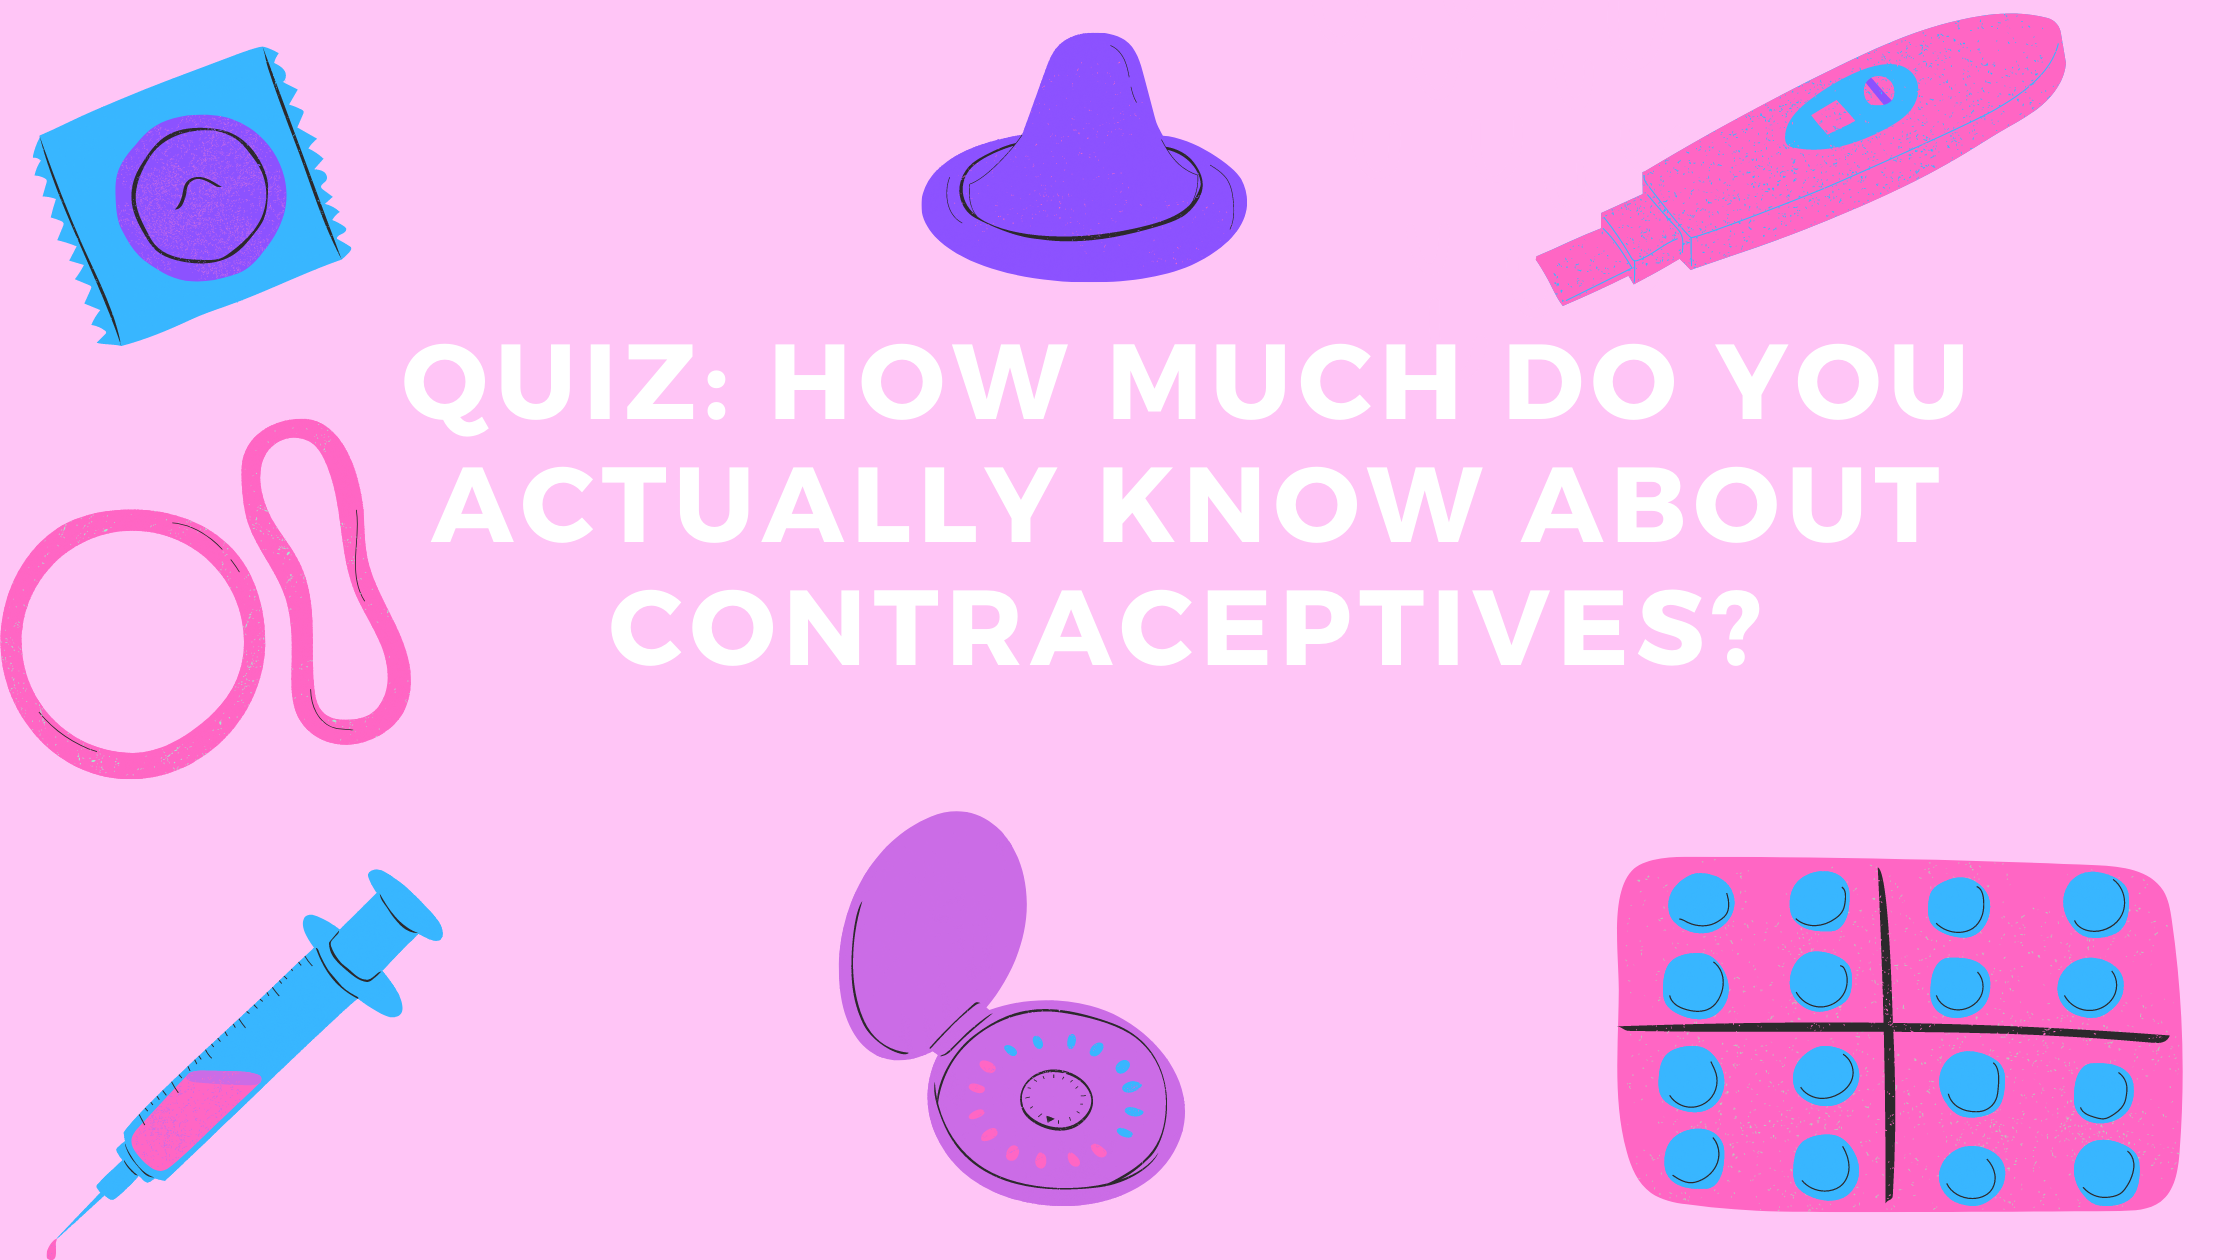 Contraceptives Quiz: How Much Do You Actually Know About Contraceptives?